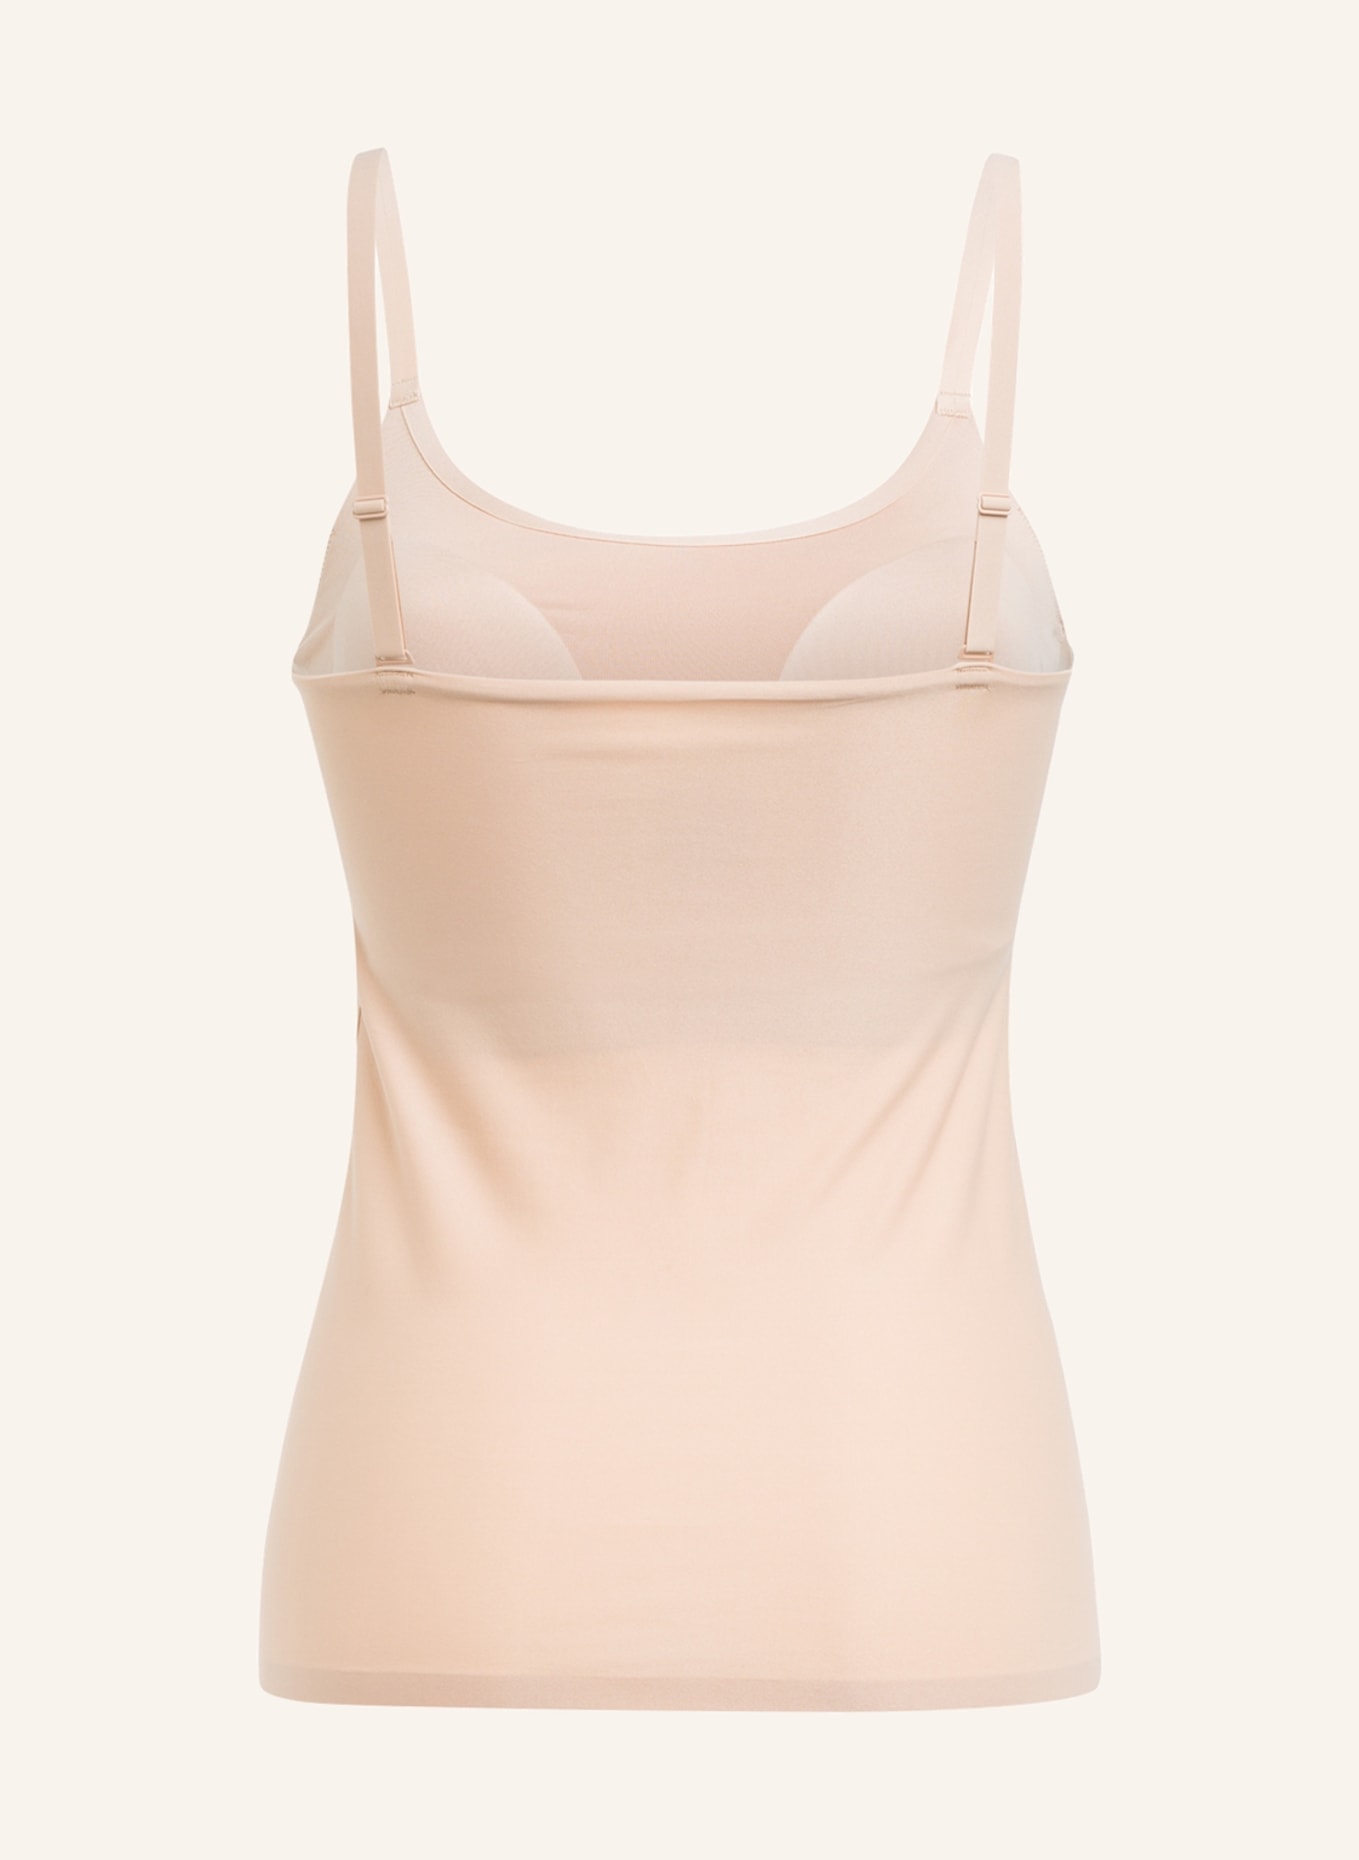 CHANTELLE Top SOFTSTRETCH mit Soft-Cups, Farbe: NUDE (Bild 2)